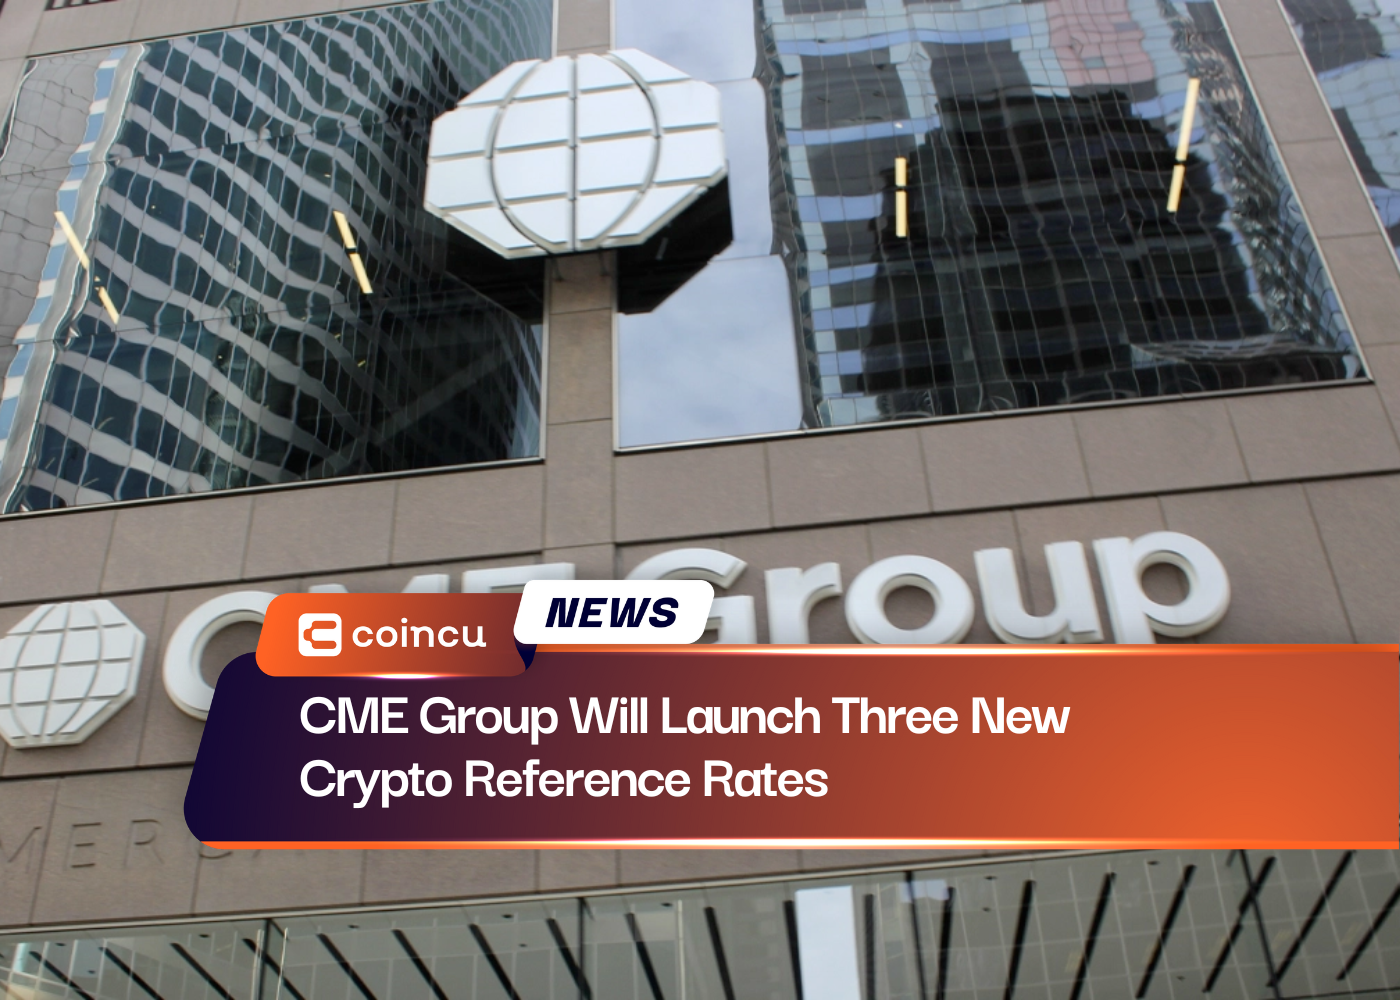 CME Group Will Launch Three New Crypto Reference Rates